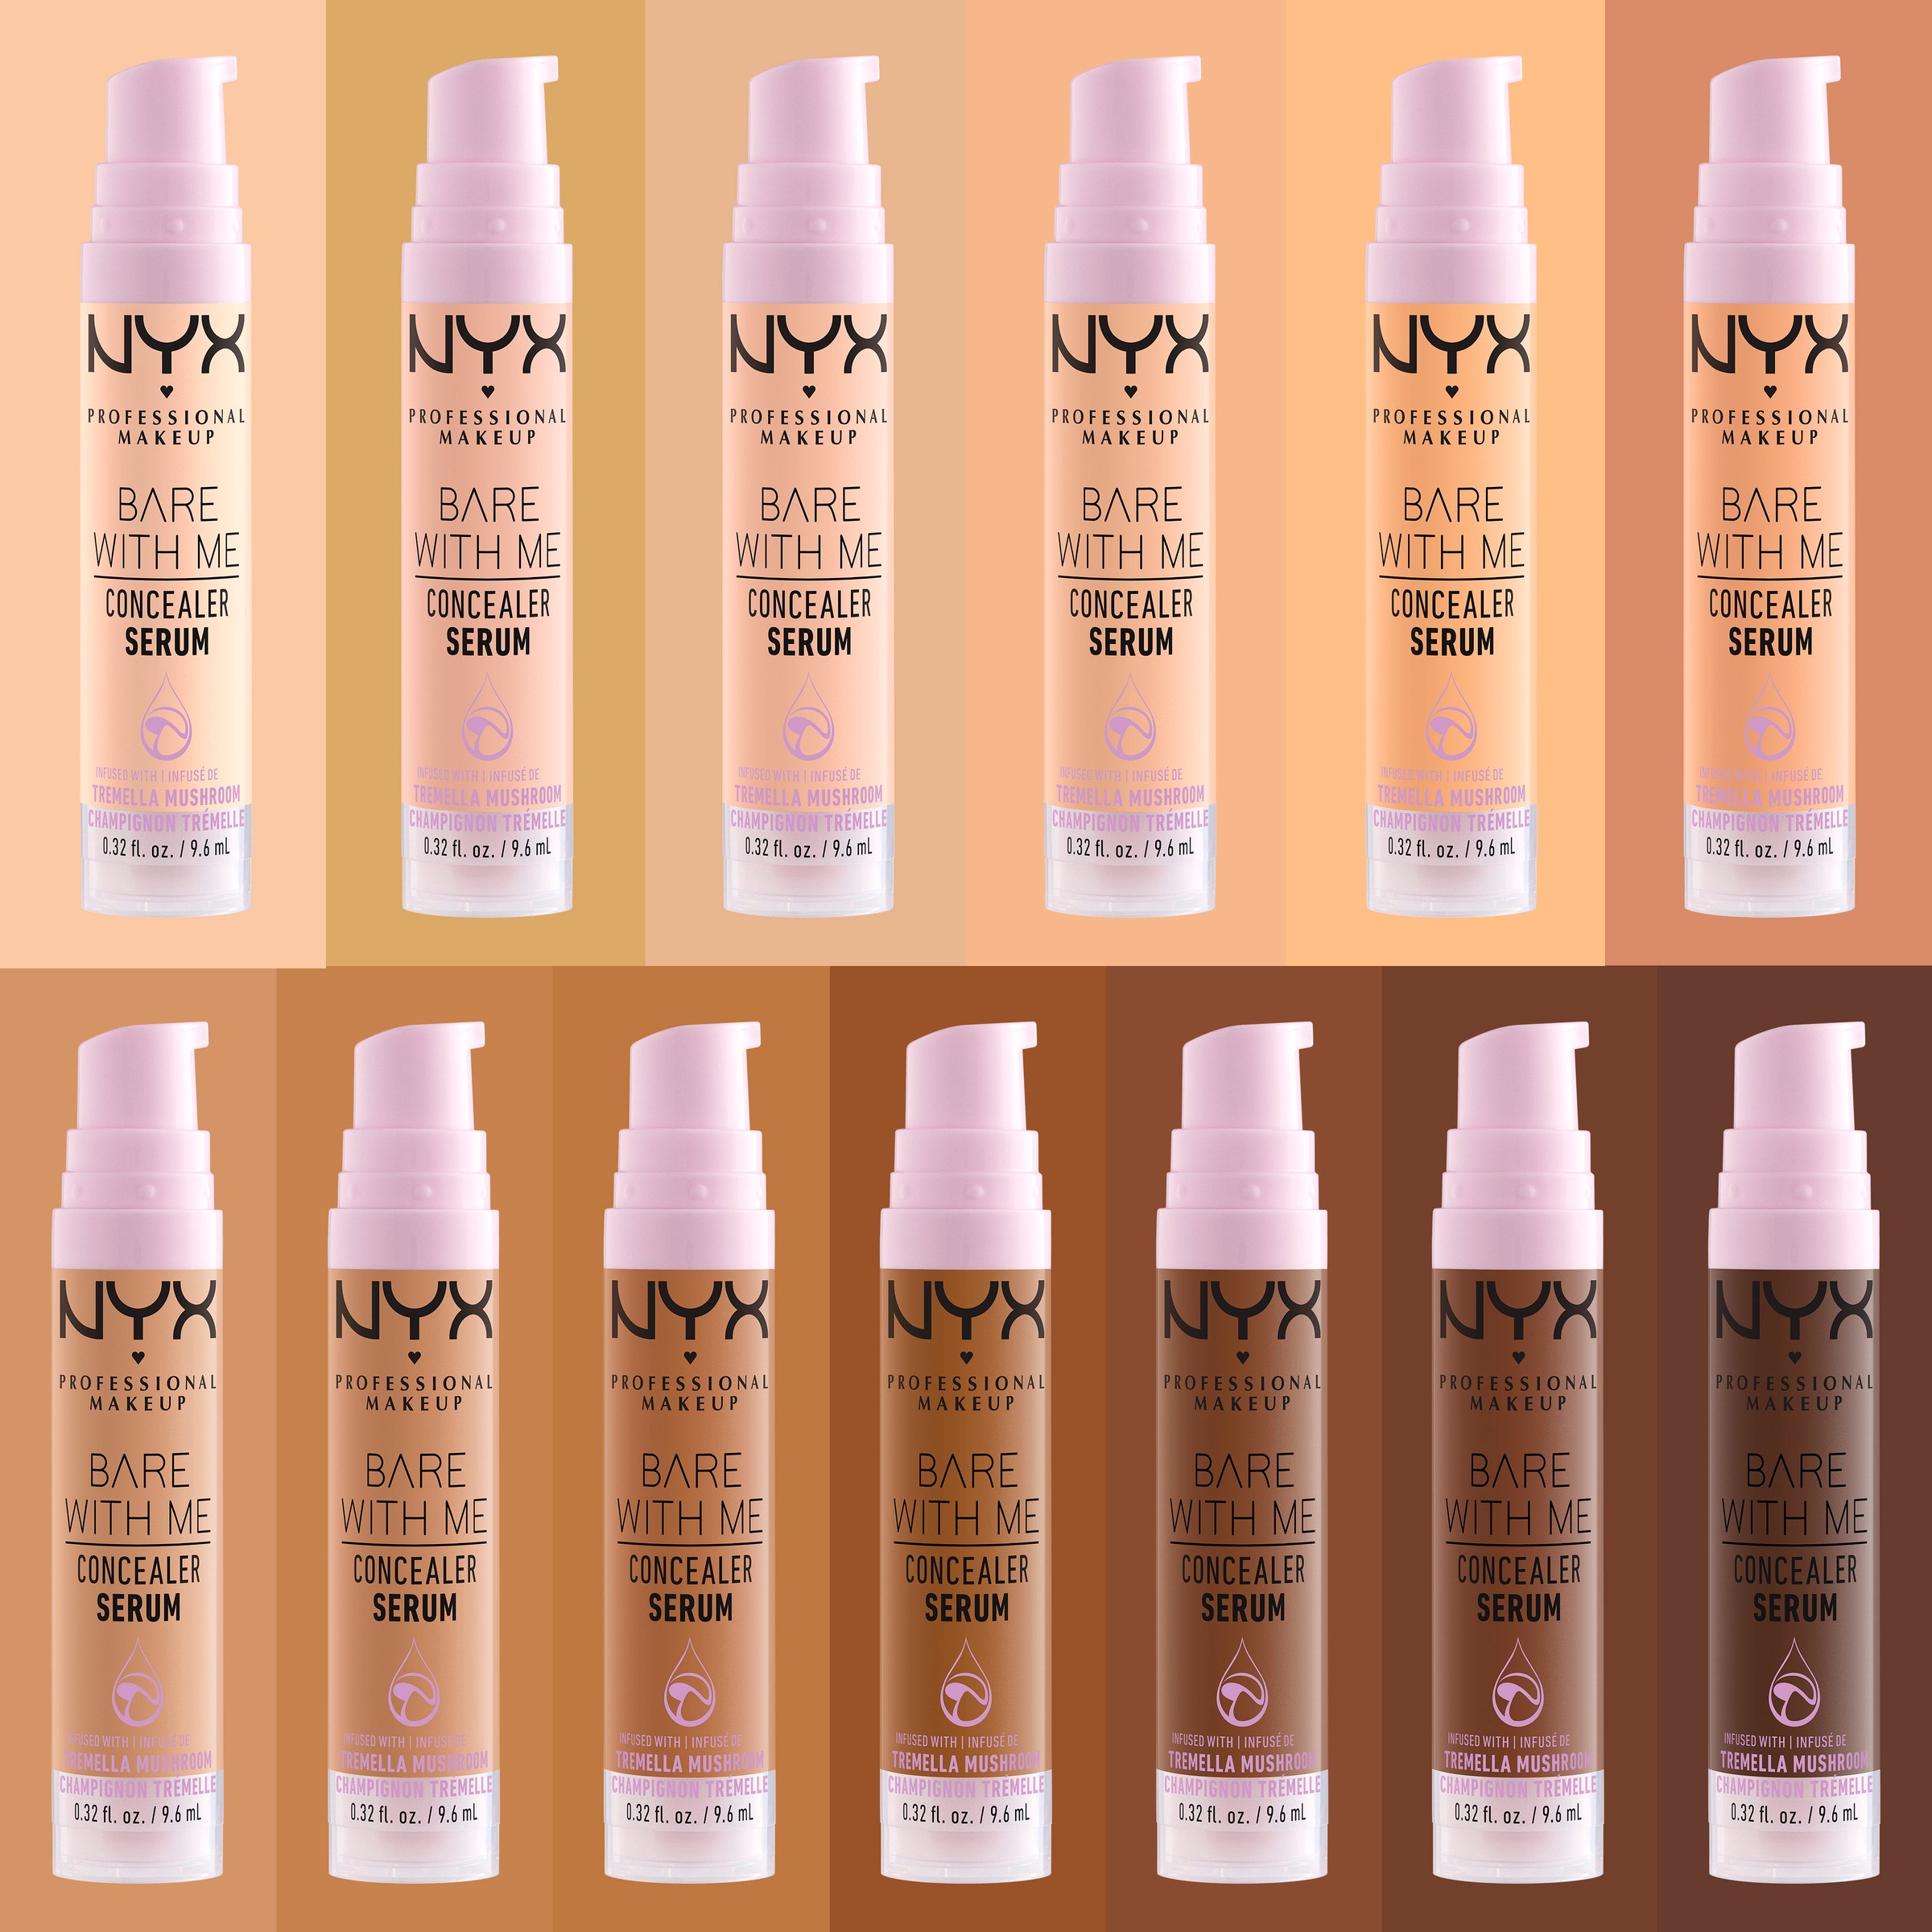 NYX Concealer »Bare With Me Concealer Serum«